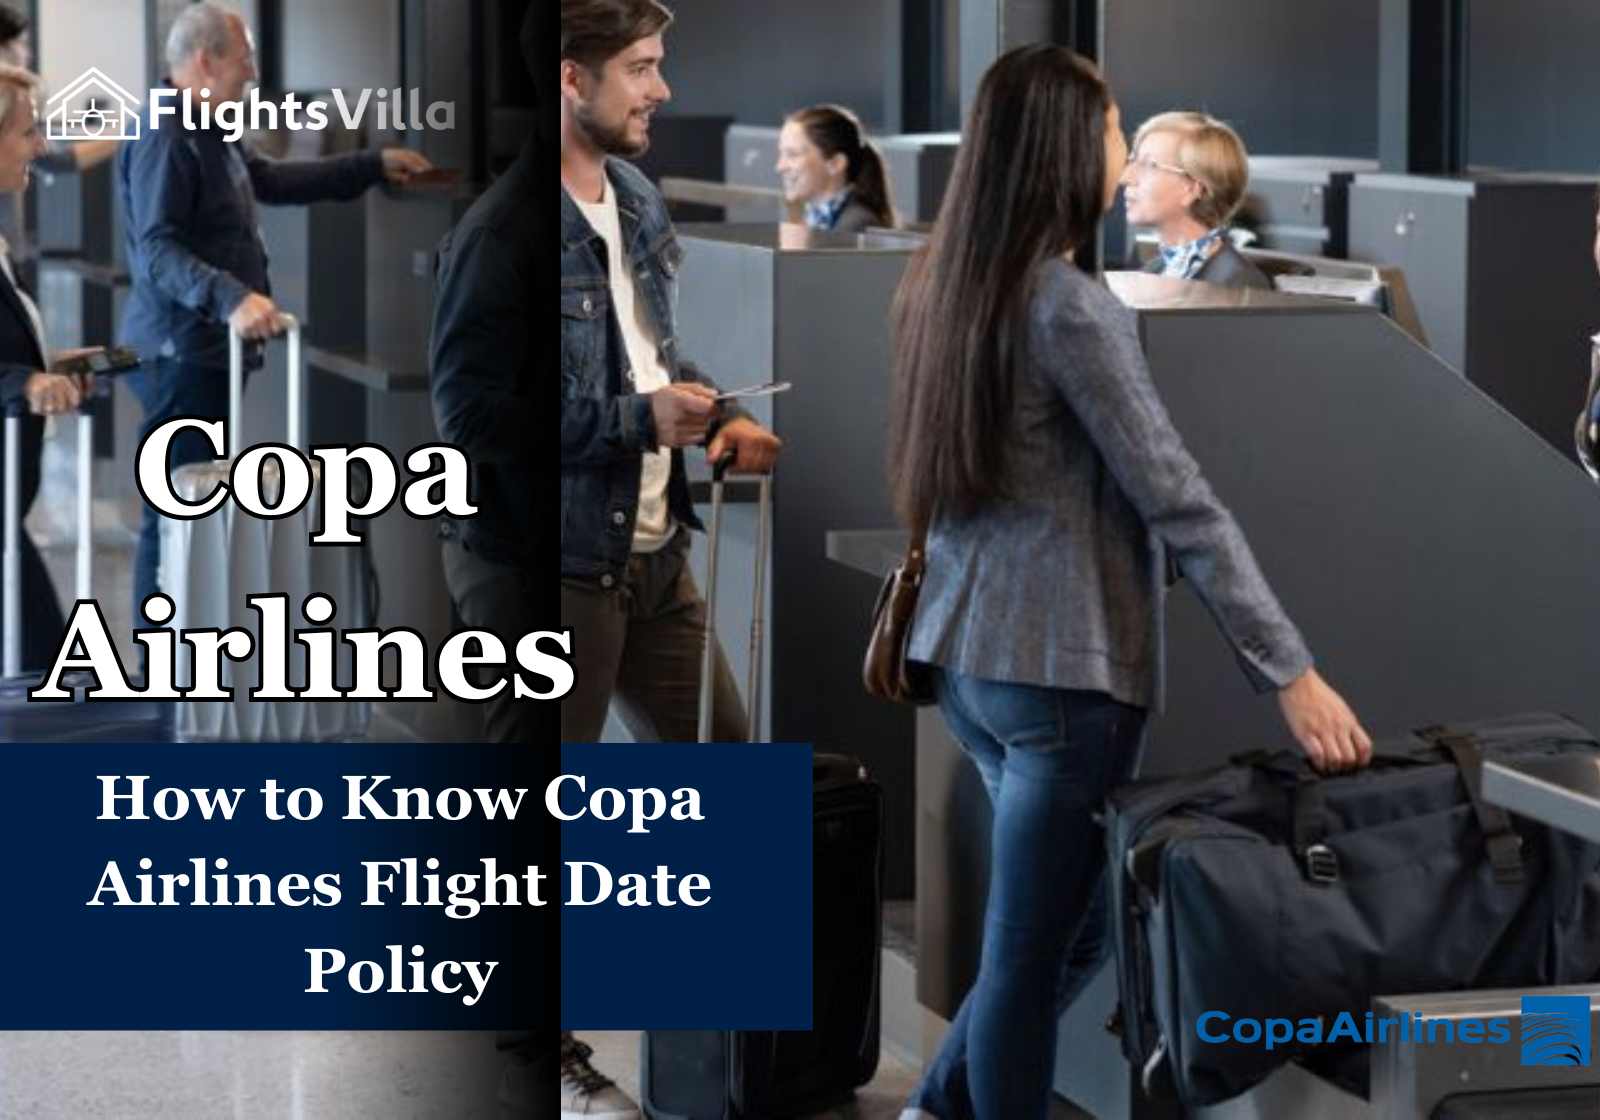 How to Know Copa Airlines Flight Date Policy